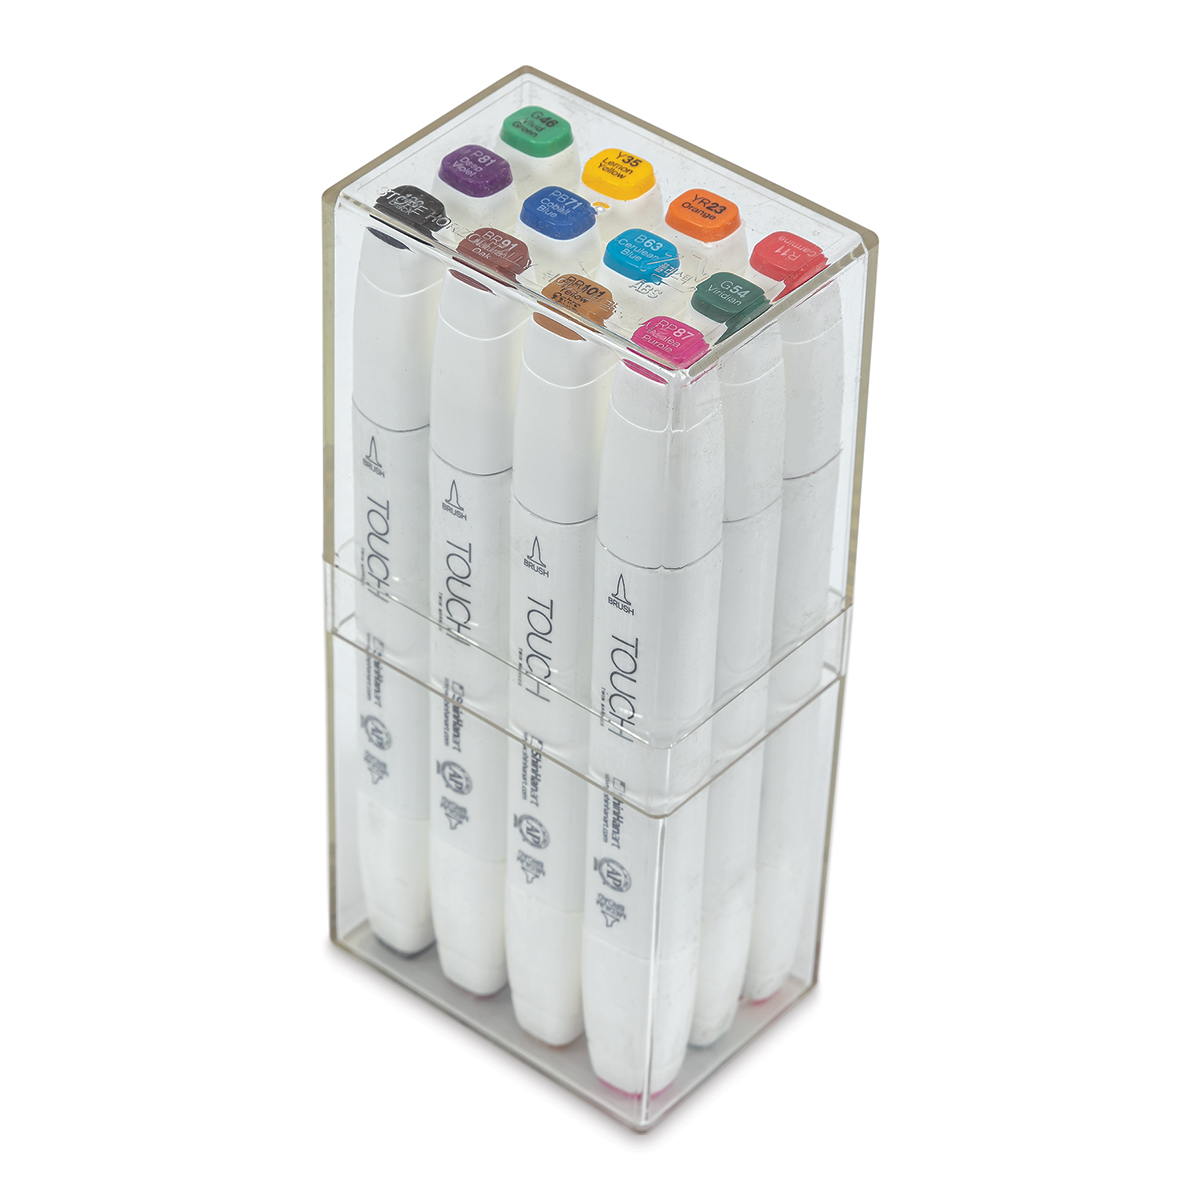 BRUSH MARKER - 12 PIECE PRIMARY SET A